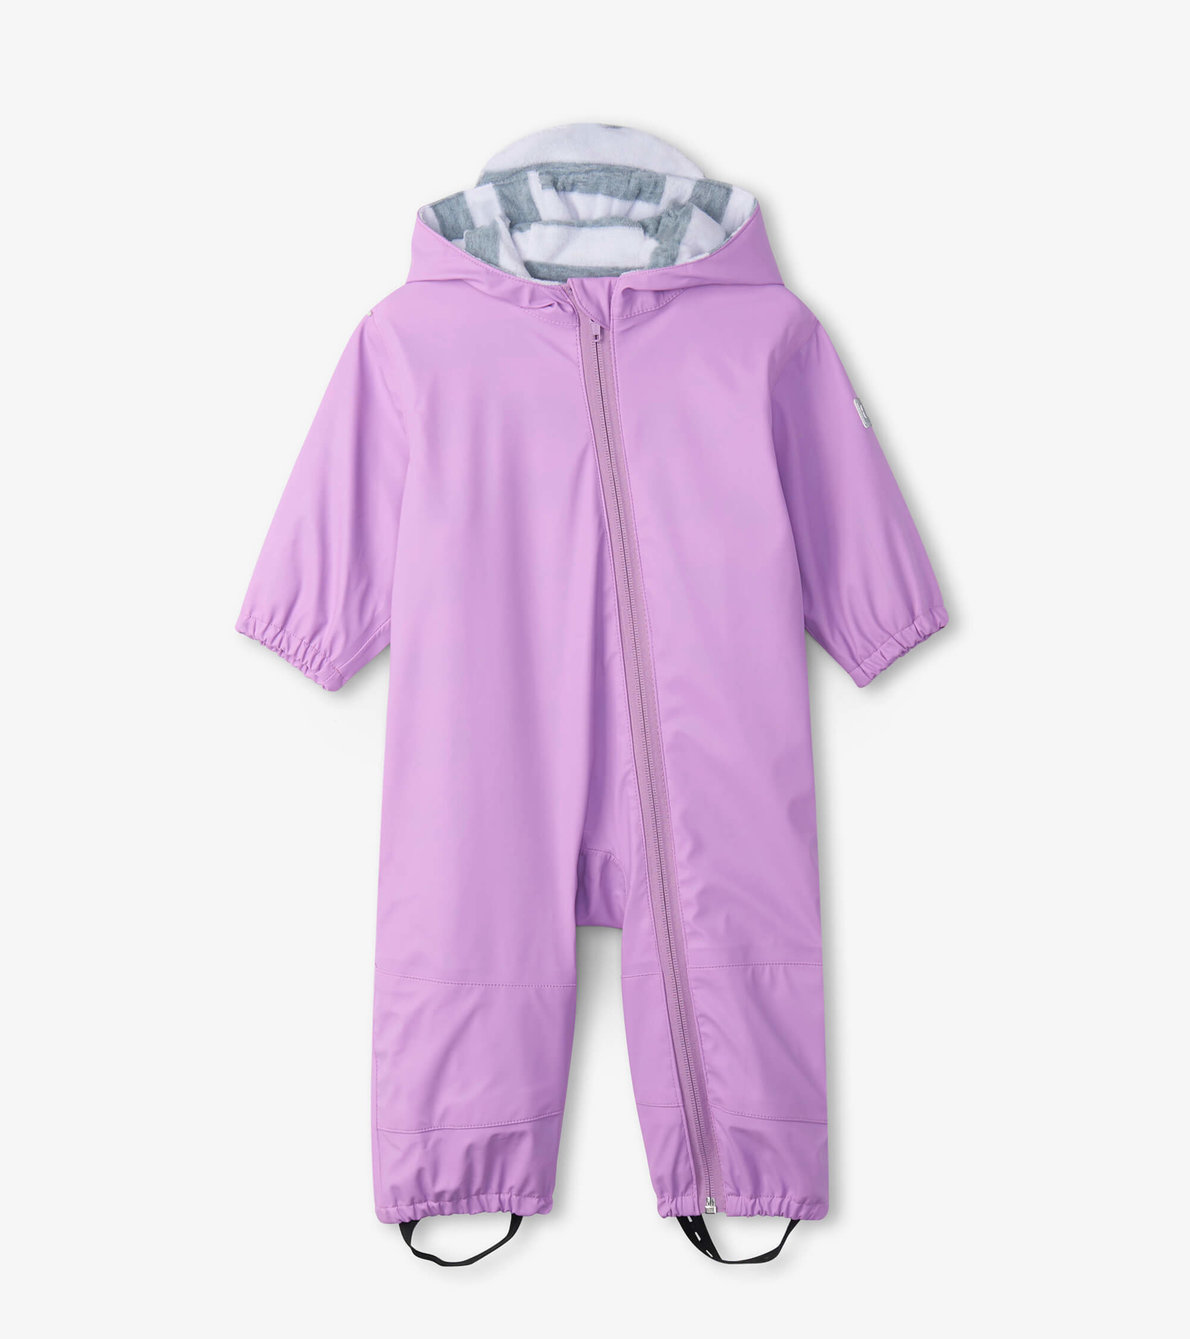 View larger image of Lilac Terry Lined Baby Rain Suit